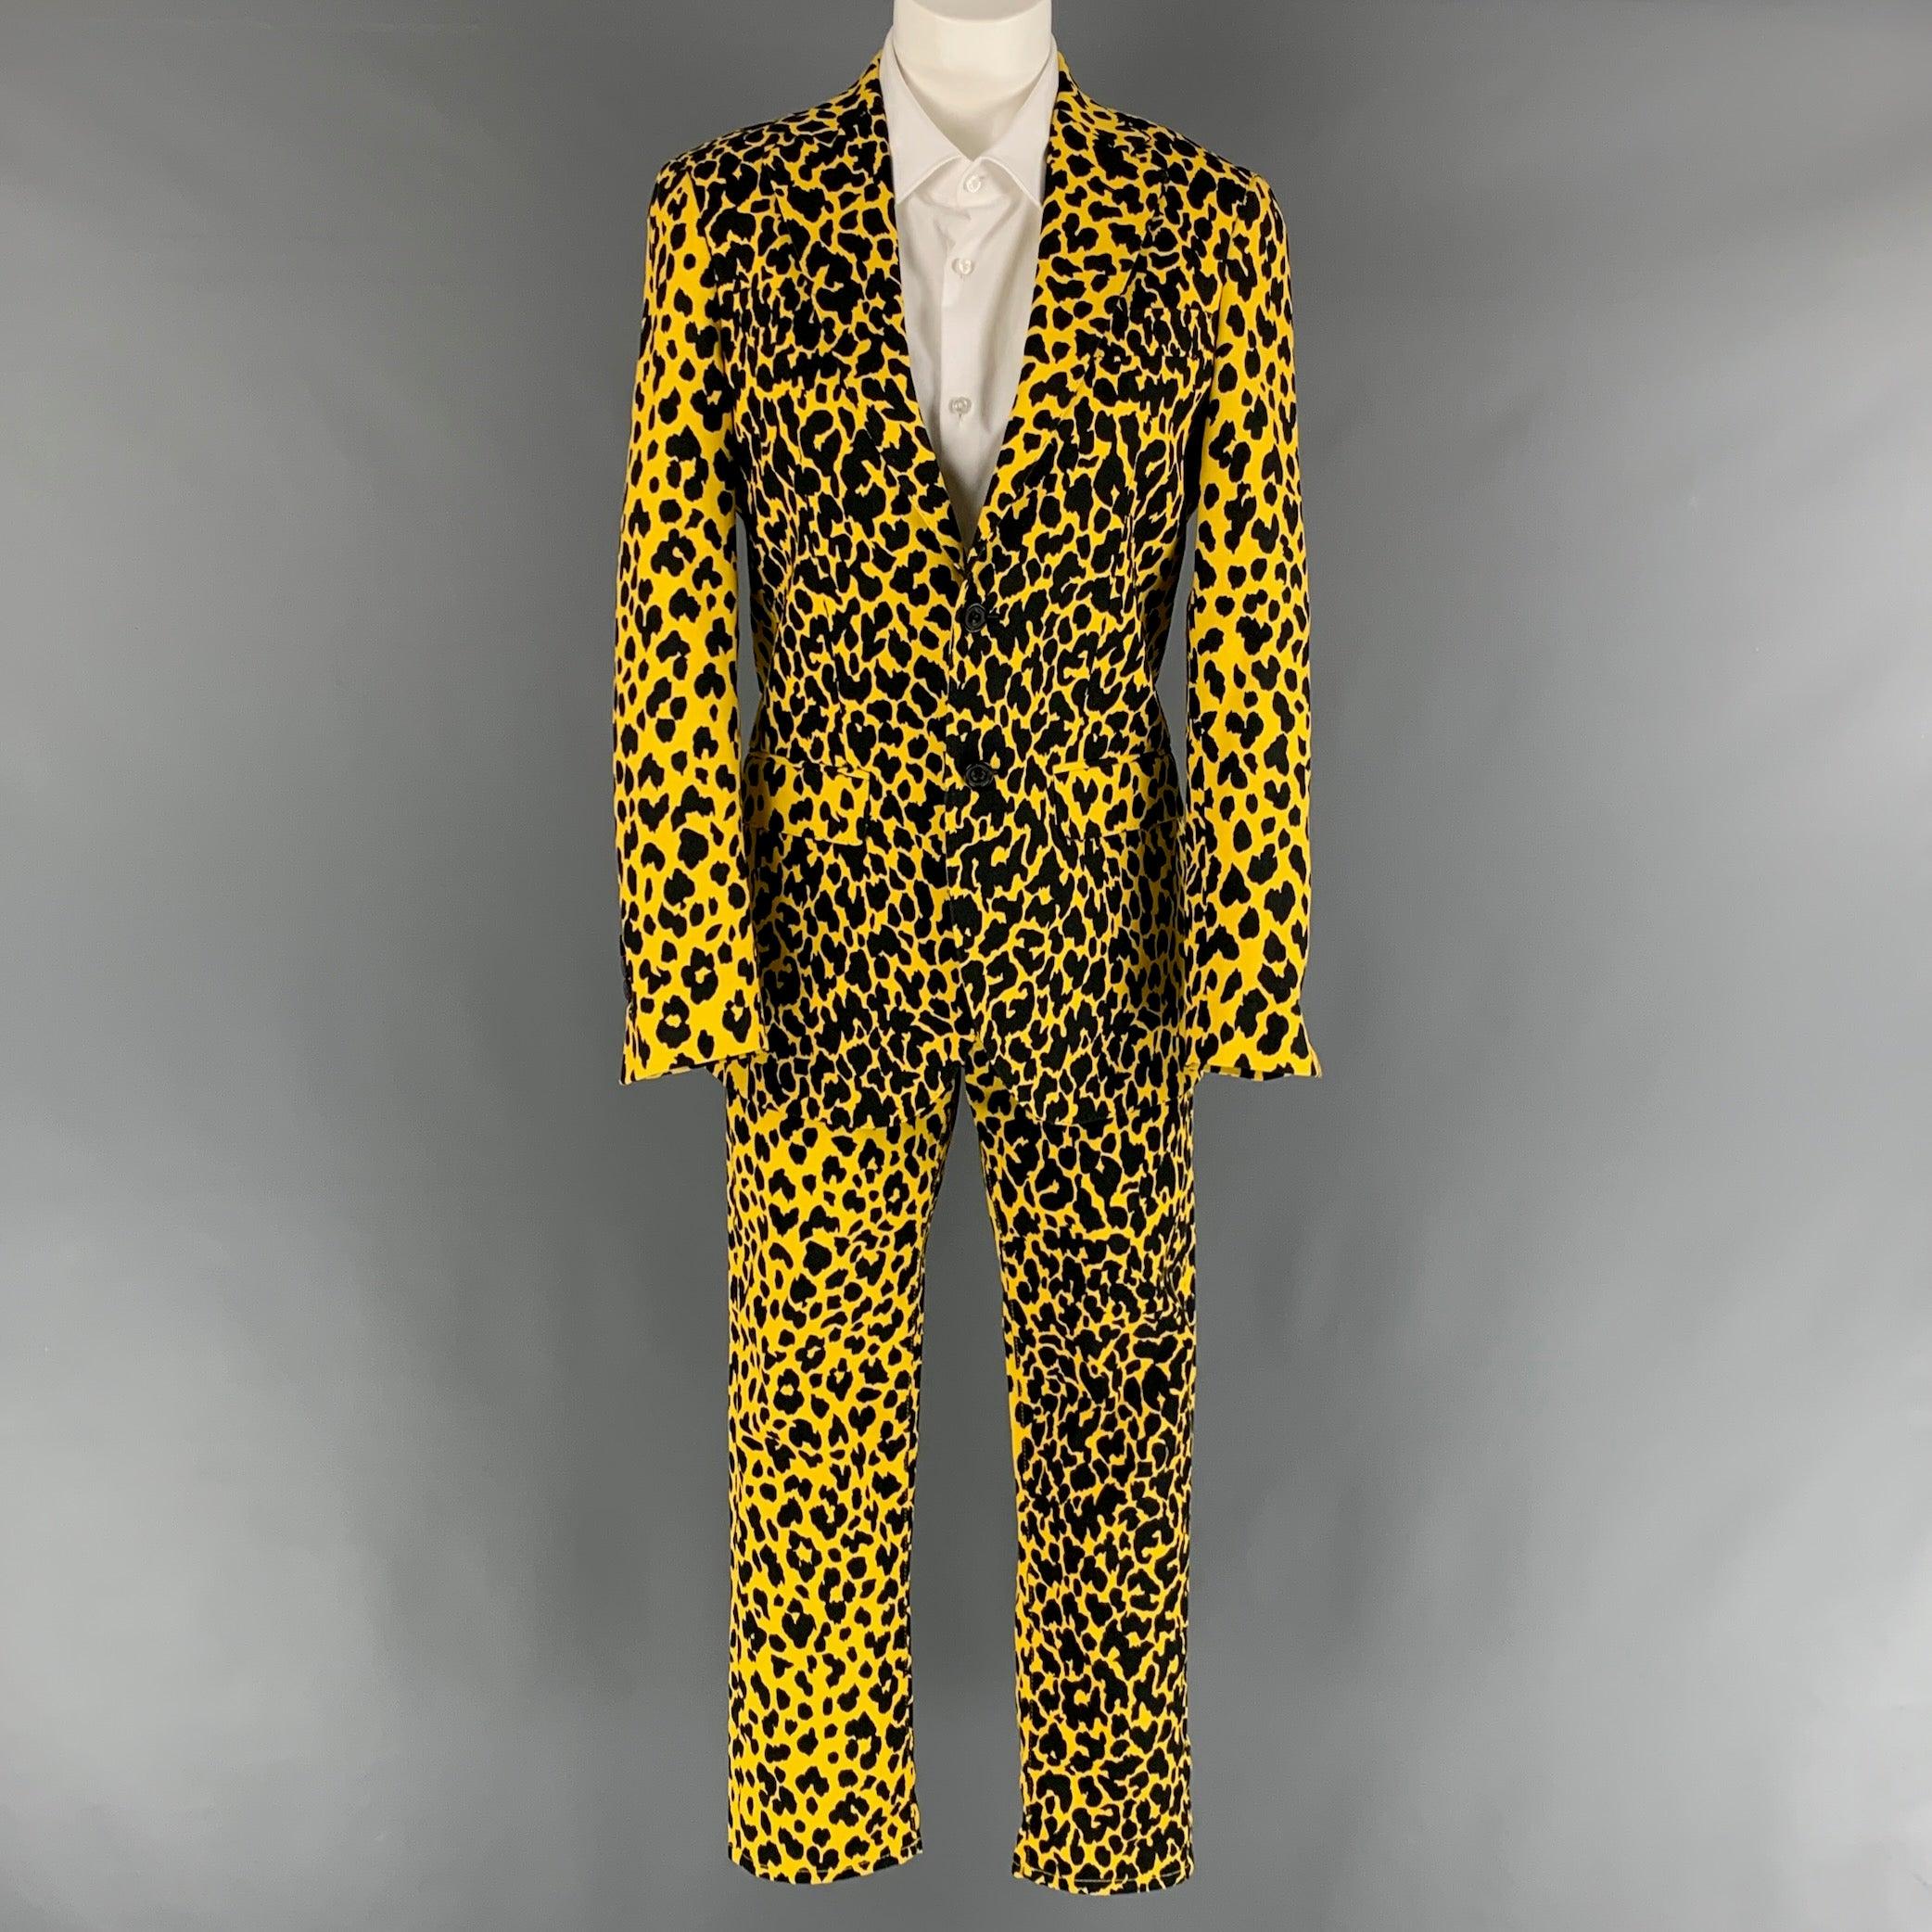 R13 suit comes in a black & yellow bold leopard animal print cotton twill with a no liner and includes a single breasted, double button sport coat with a notch lapel and matching denim style trousers. Made in USA.Excellent Pre-Owned Condition. 